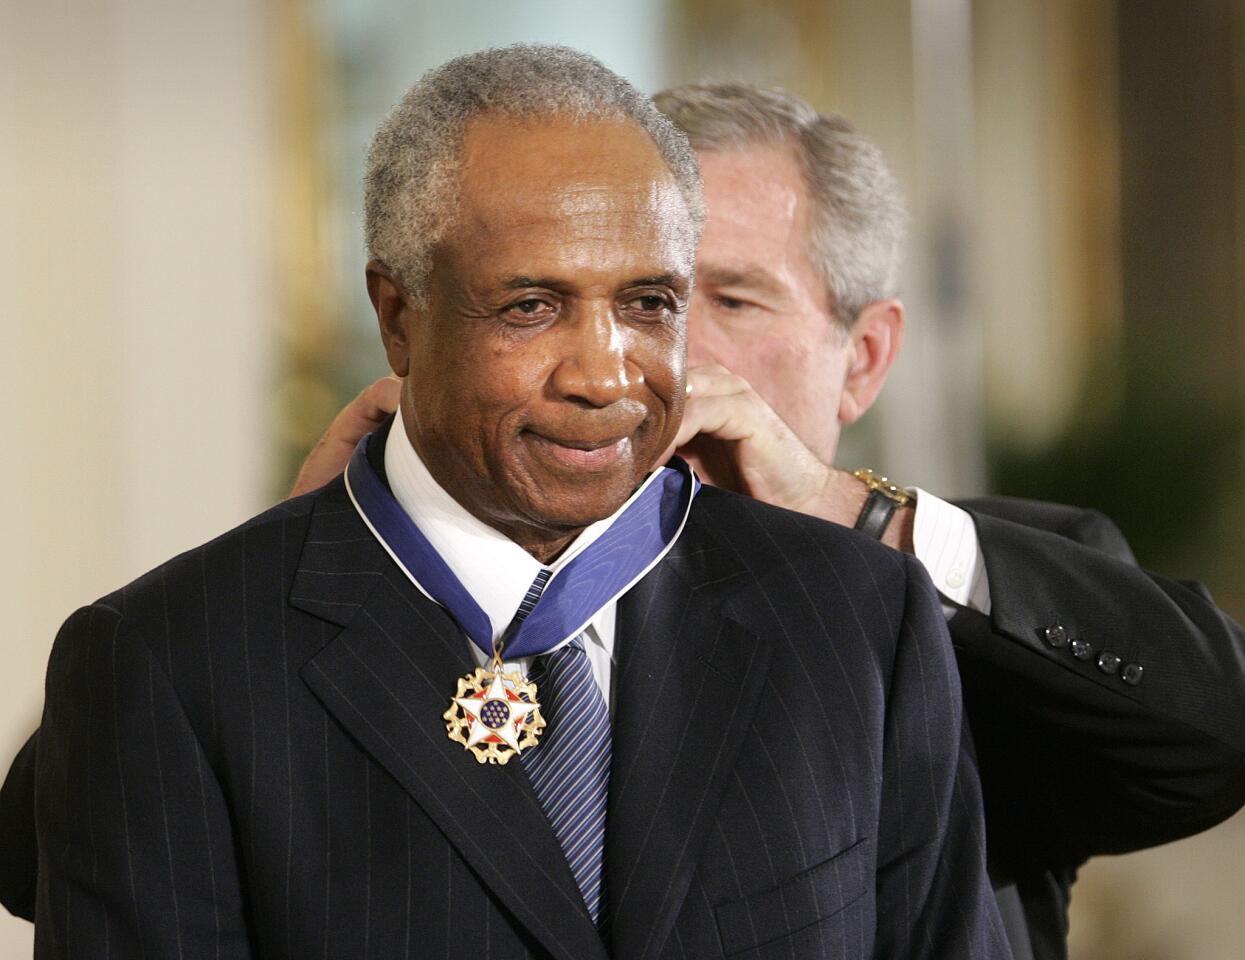 President George W. Bush awards baseball legend Frank Robinson the Presidential Medal of Freedom in the East Room of the White House in Washington on Nov. 9, 2005.